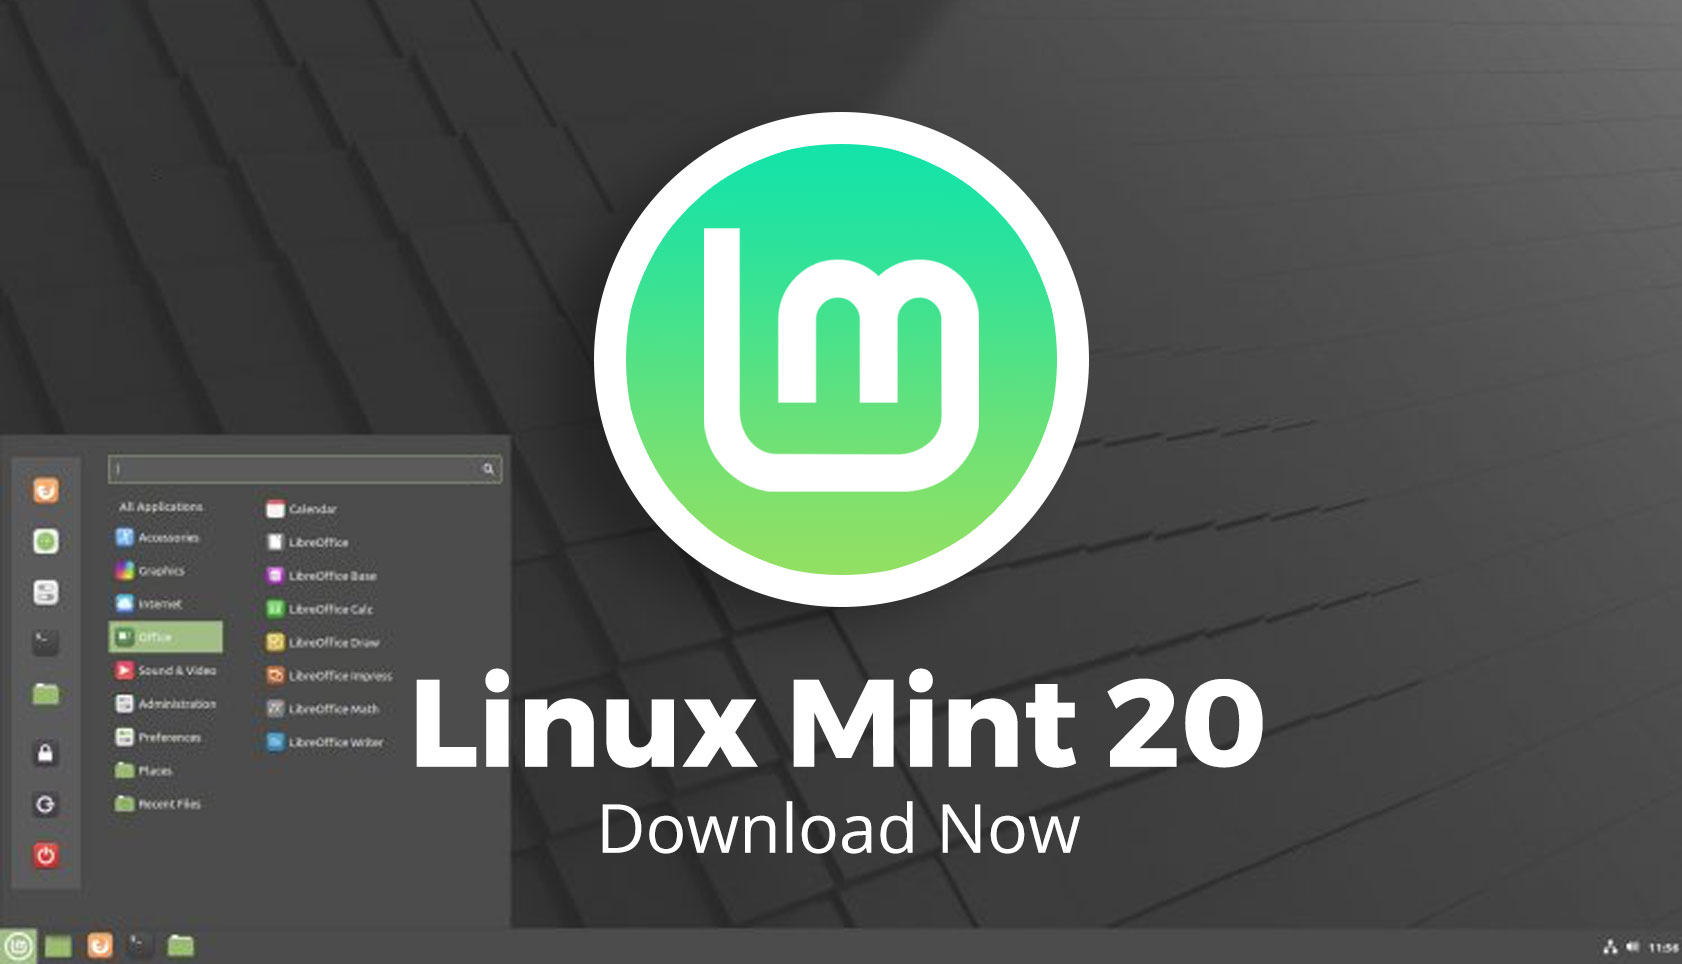 Linux Mint 20 Downloads Go Live, This is New - Ubuntu!